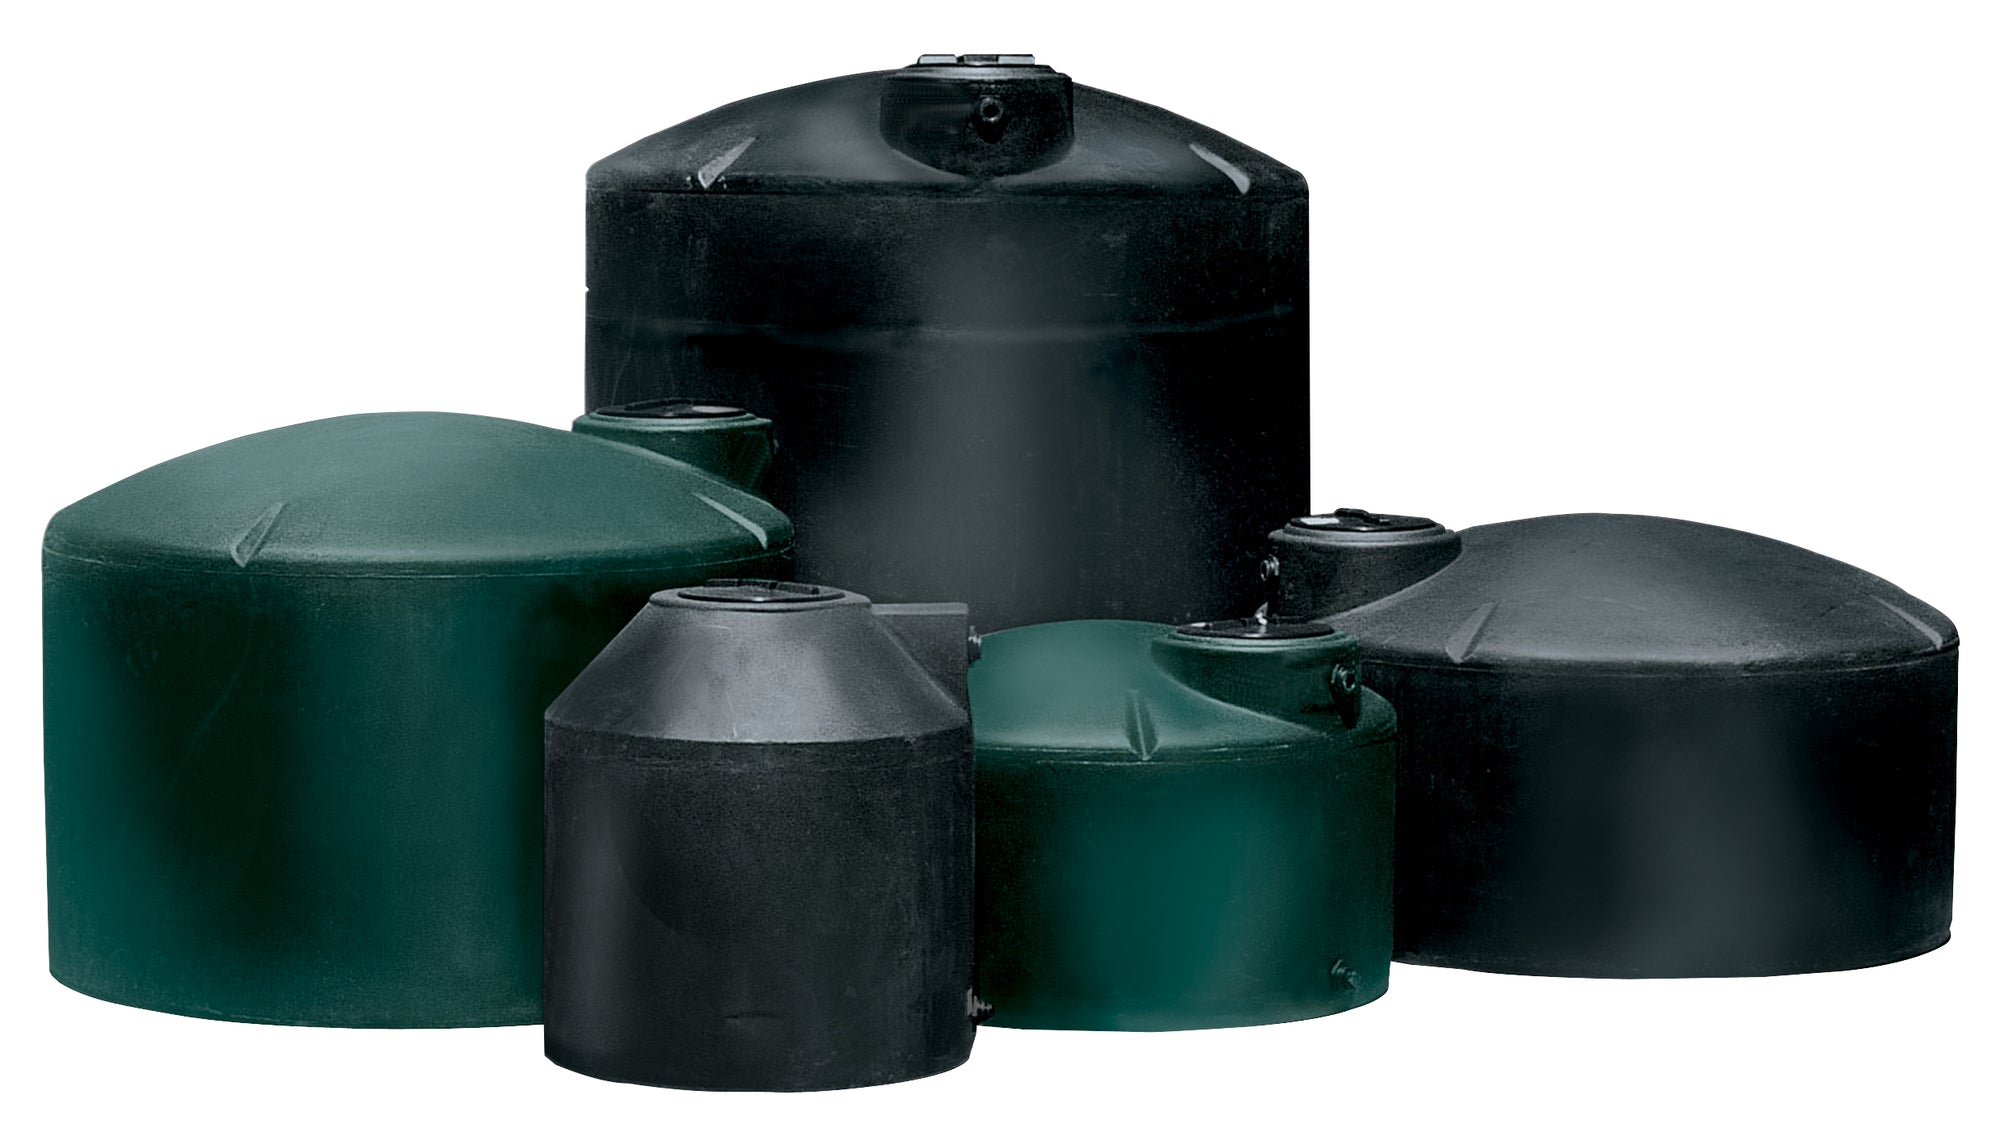 Why Most Plastic Water Storage Tanks Are Black in Color